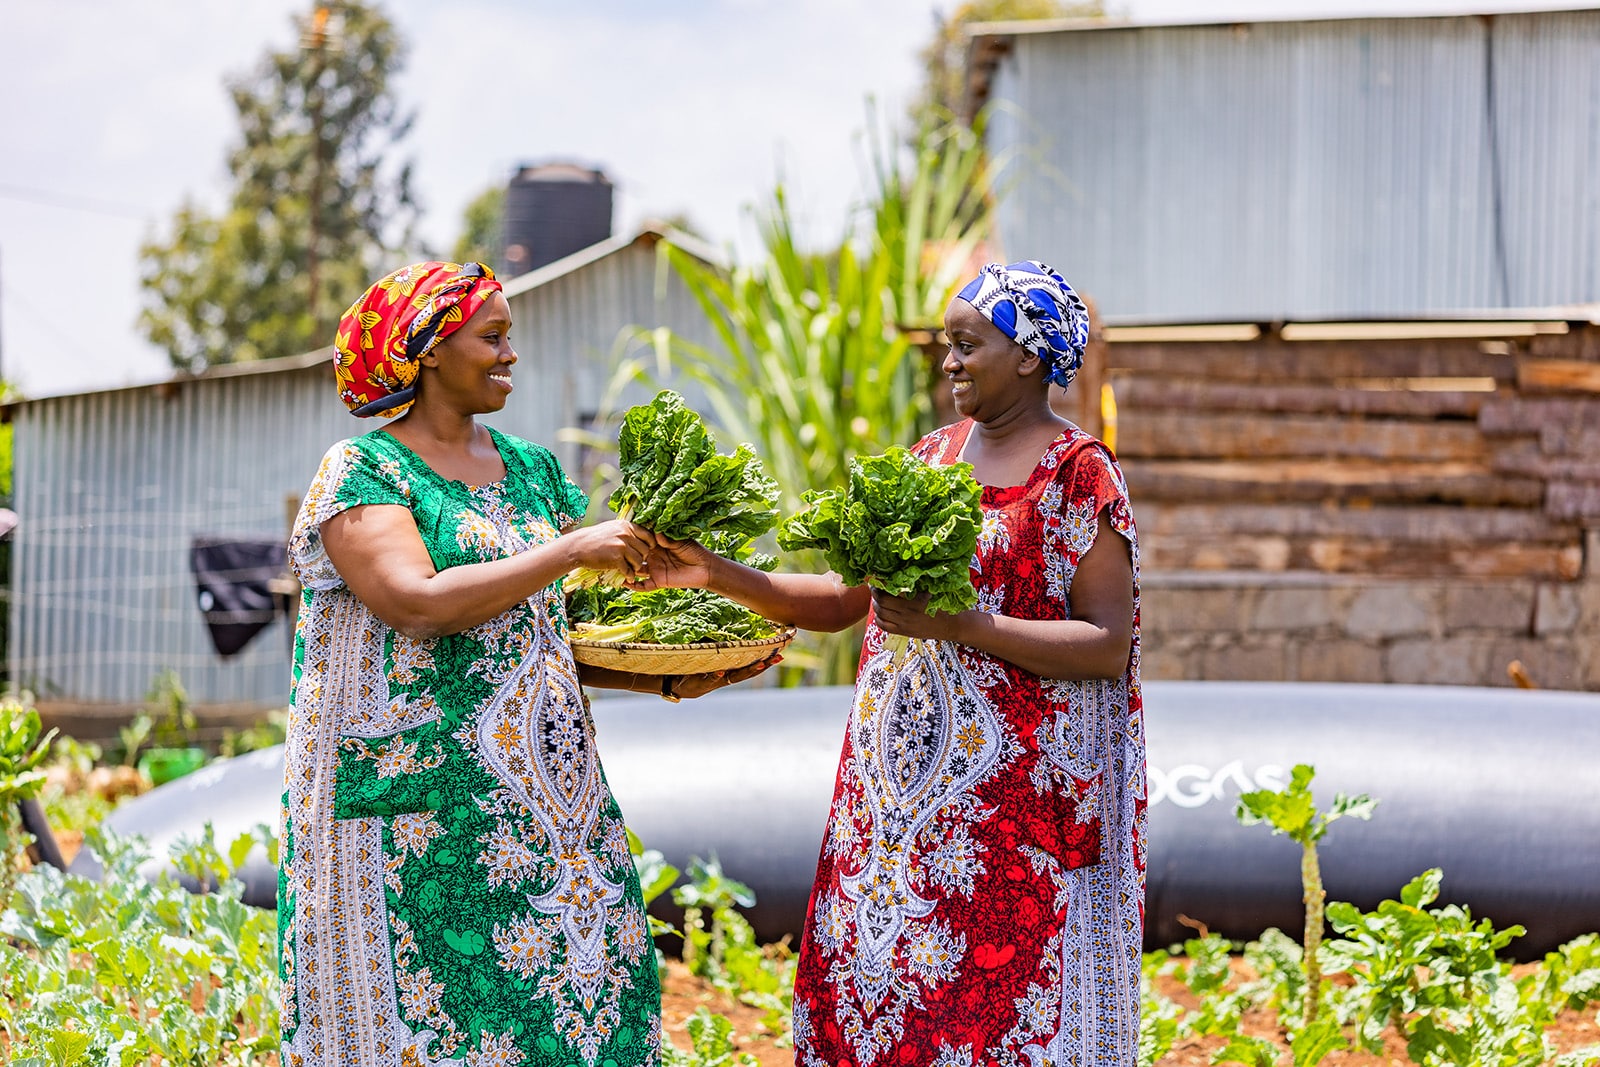 HomeBiogas Achieves Gold Standard Certification: A Leap Towards Sustainable Living in Kenya